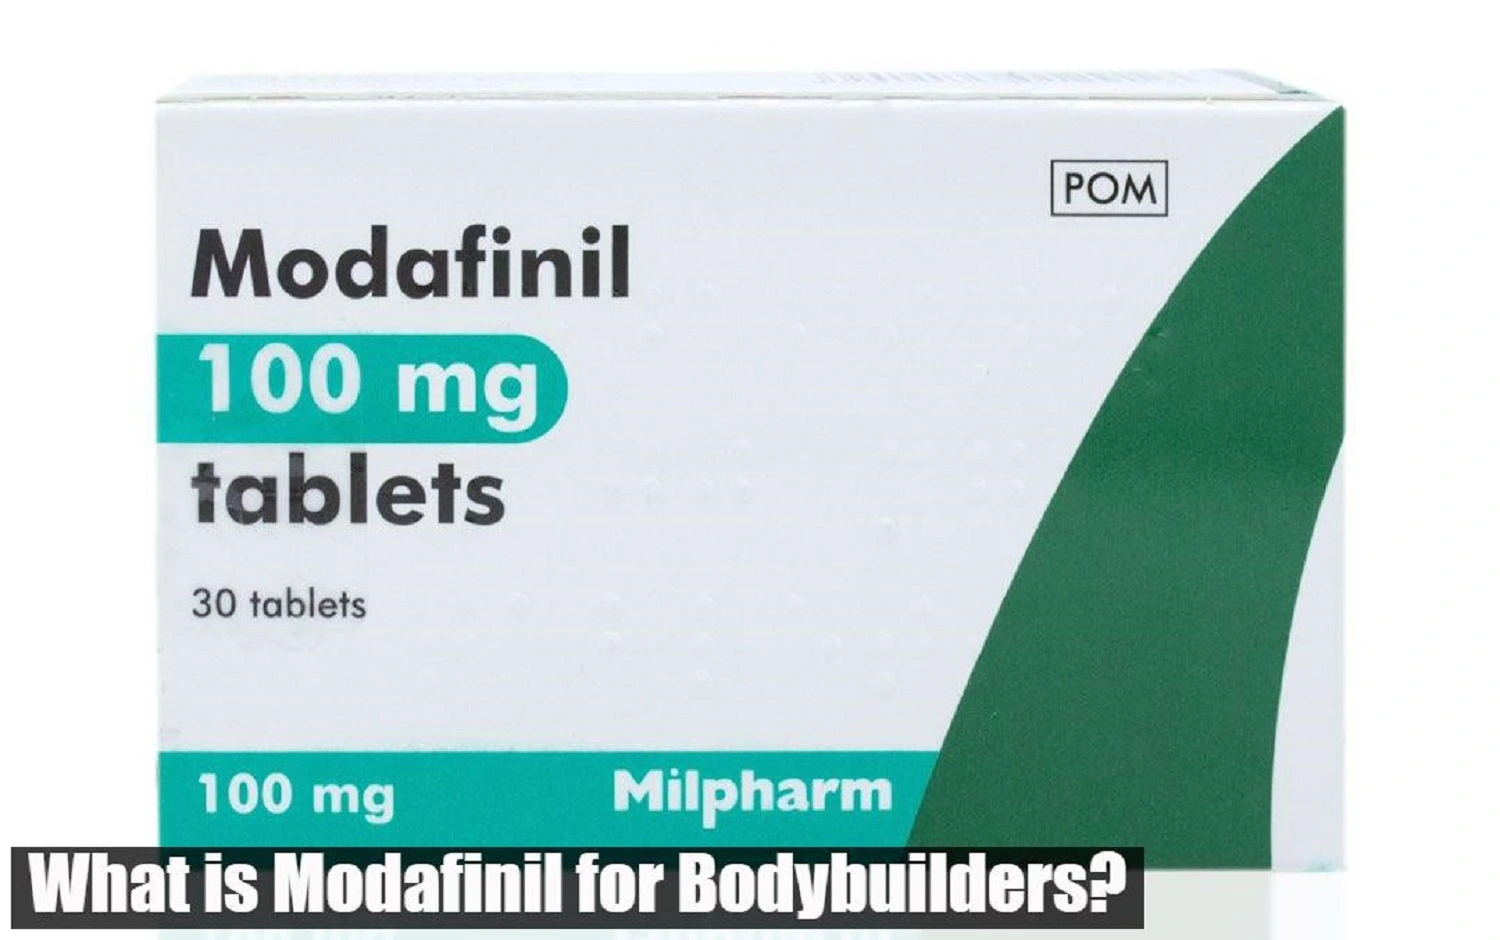 What is Modafinil for Bodybuilders